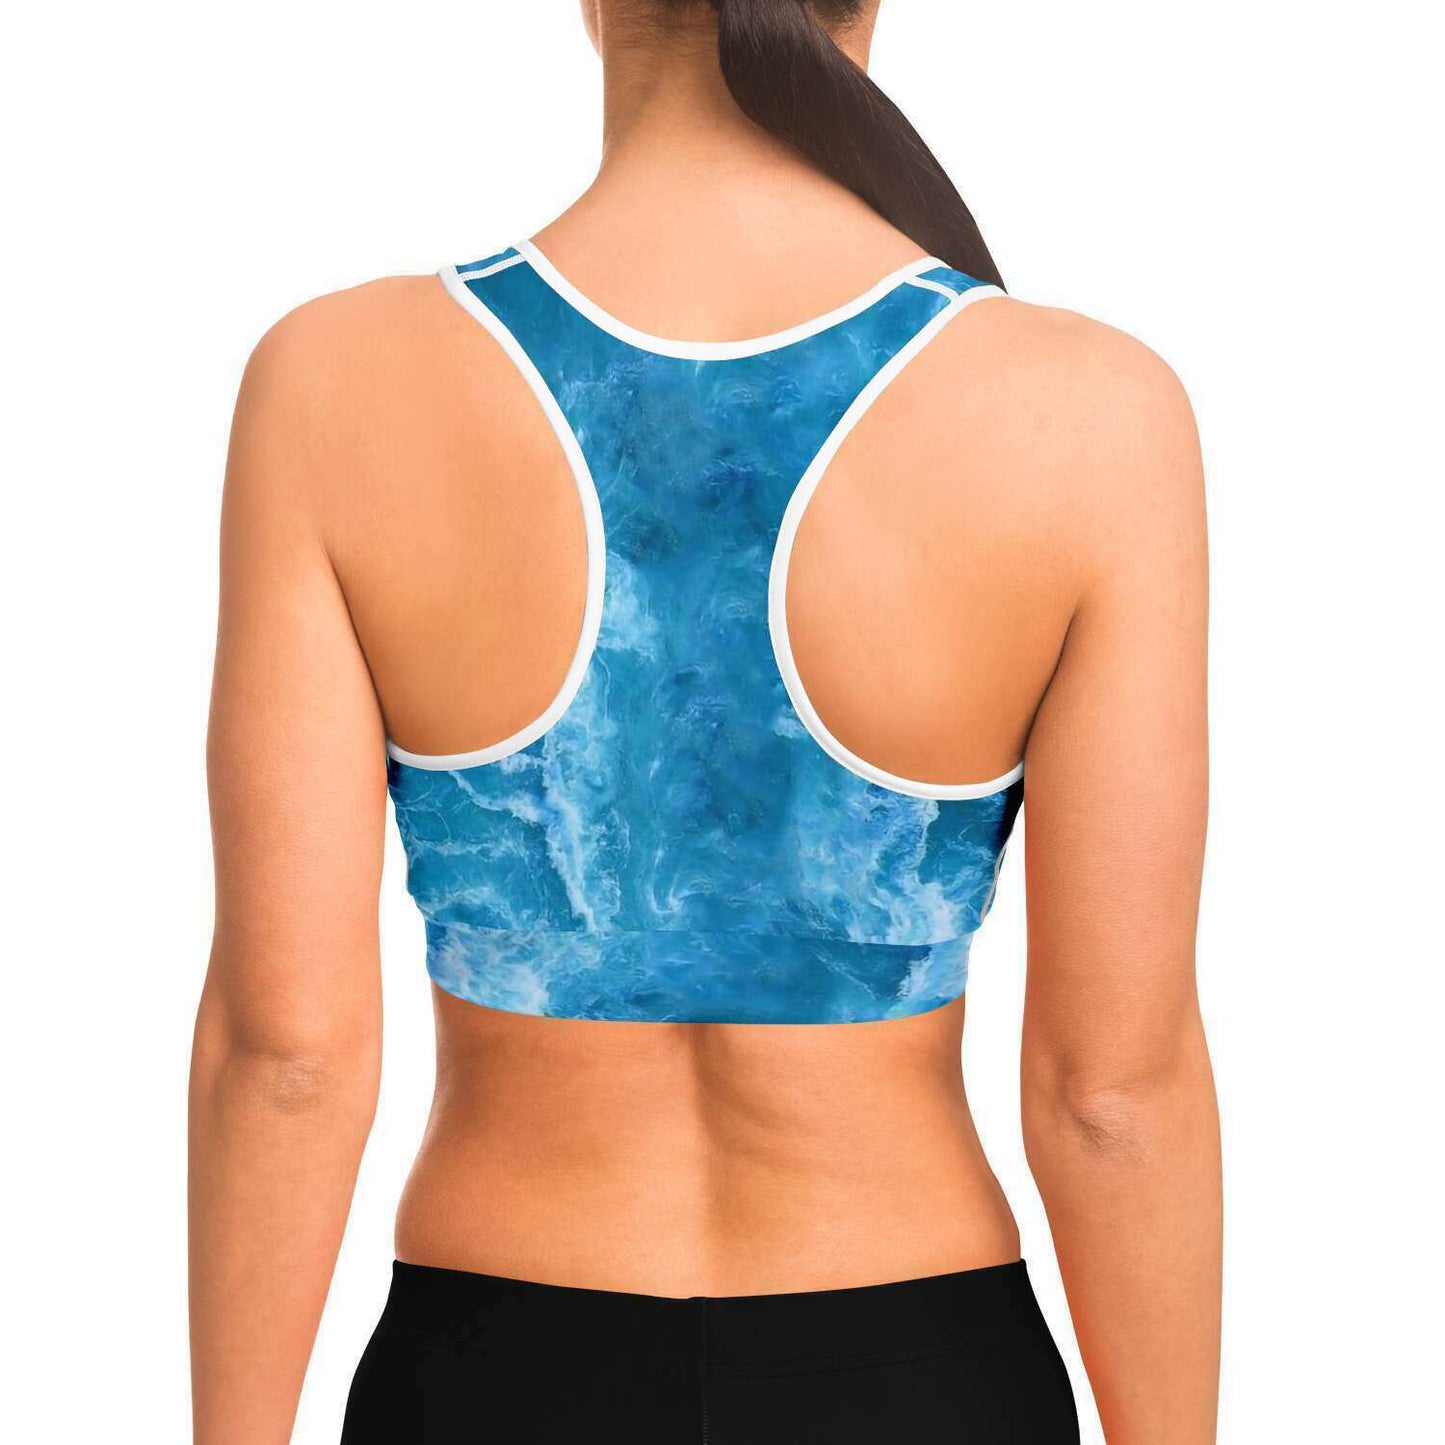 Ocean crop top sports bra back view on model for scuba divers, yoga and other sports